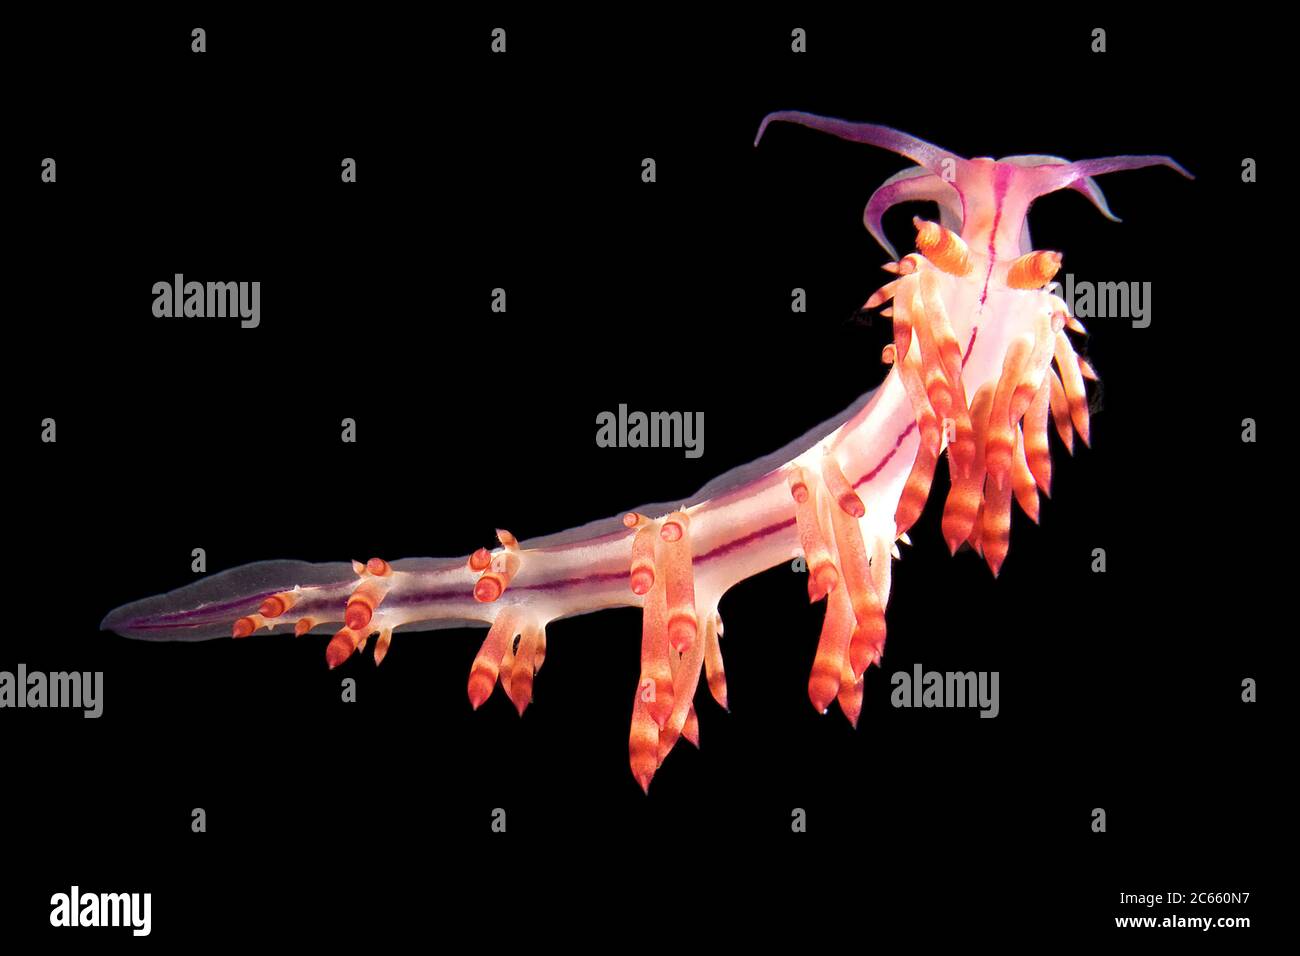 Sea slug, Flabellina rubrolineata, Aeolid nudibranchs can be recognised by the long tubular 'cerata' which grow out from their body. Stock Photo